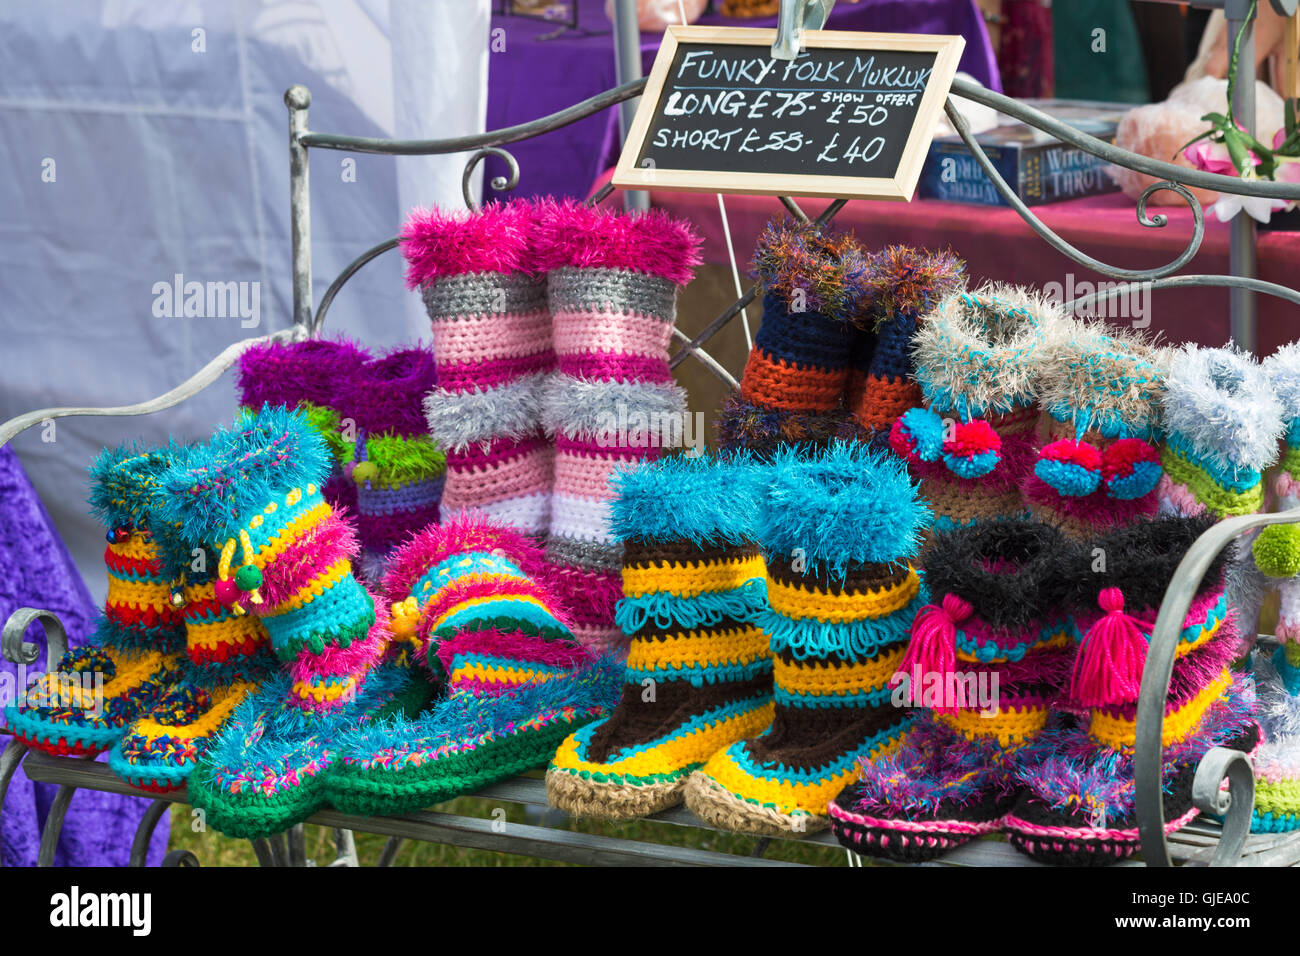 Funky Folk Mukluk boots for sale at the New Forest Fairy Festival at Burley, Hampshire, UK in August Stock Photo